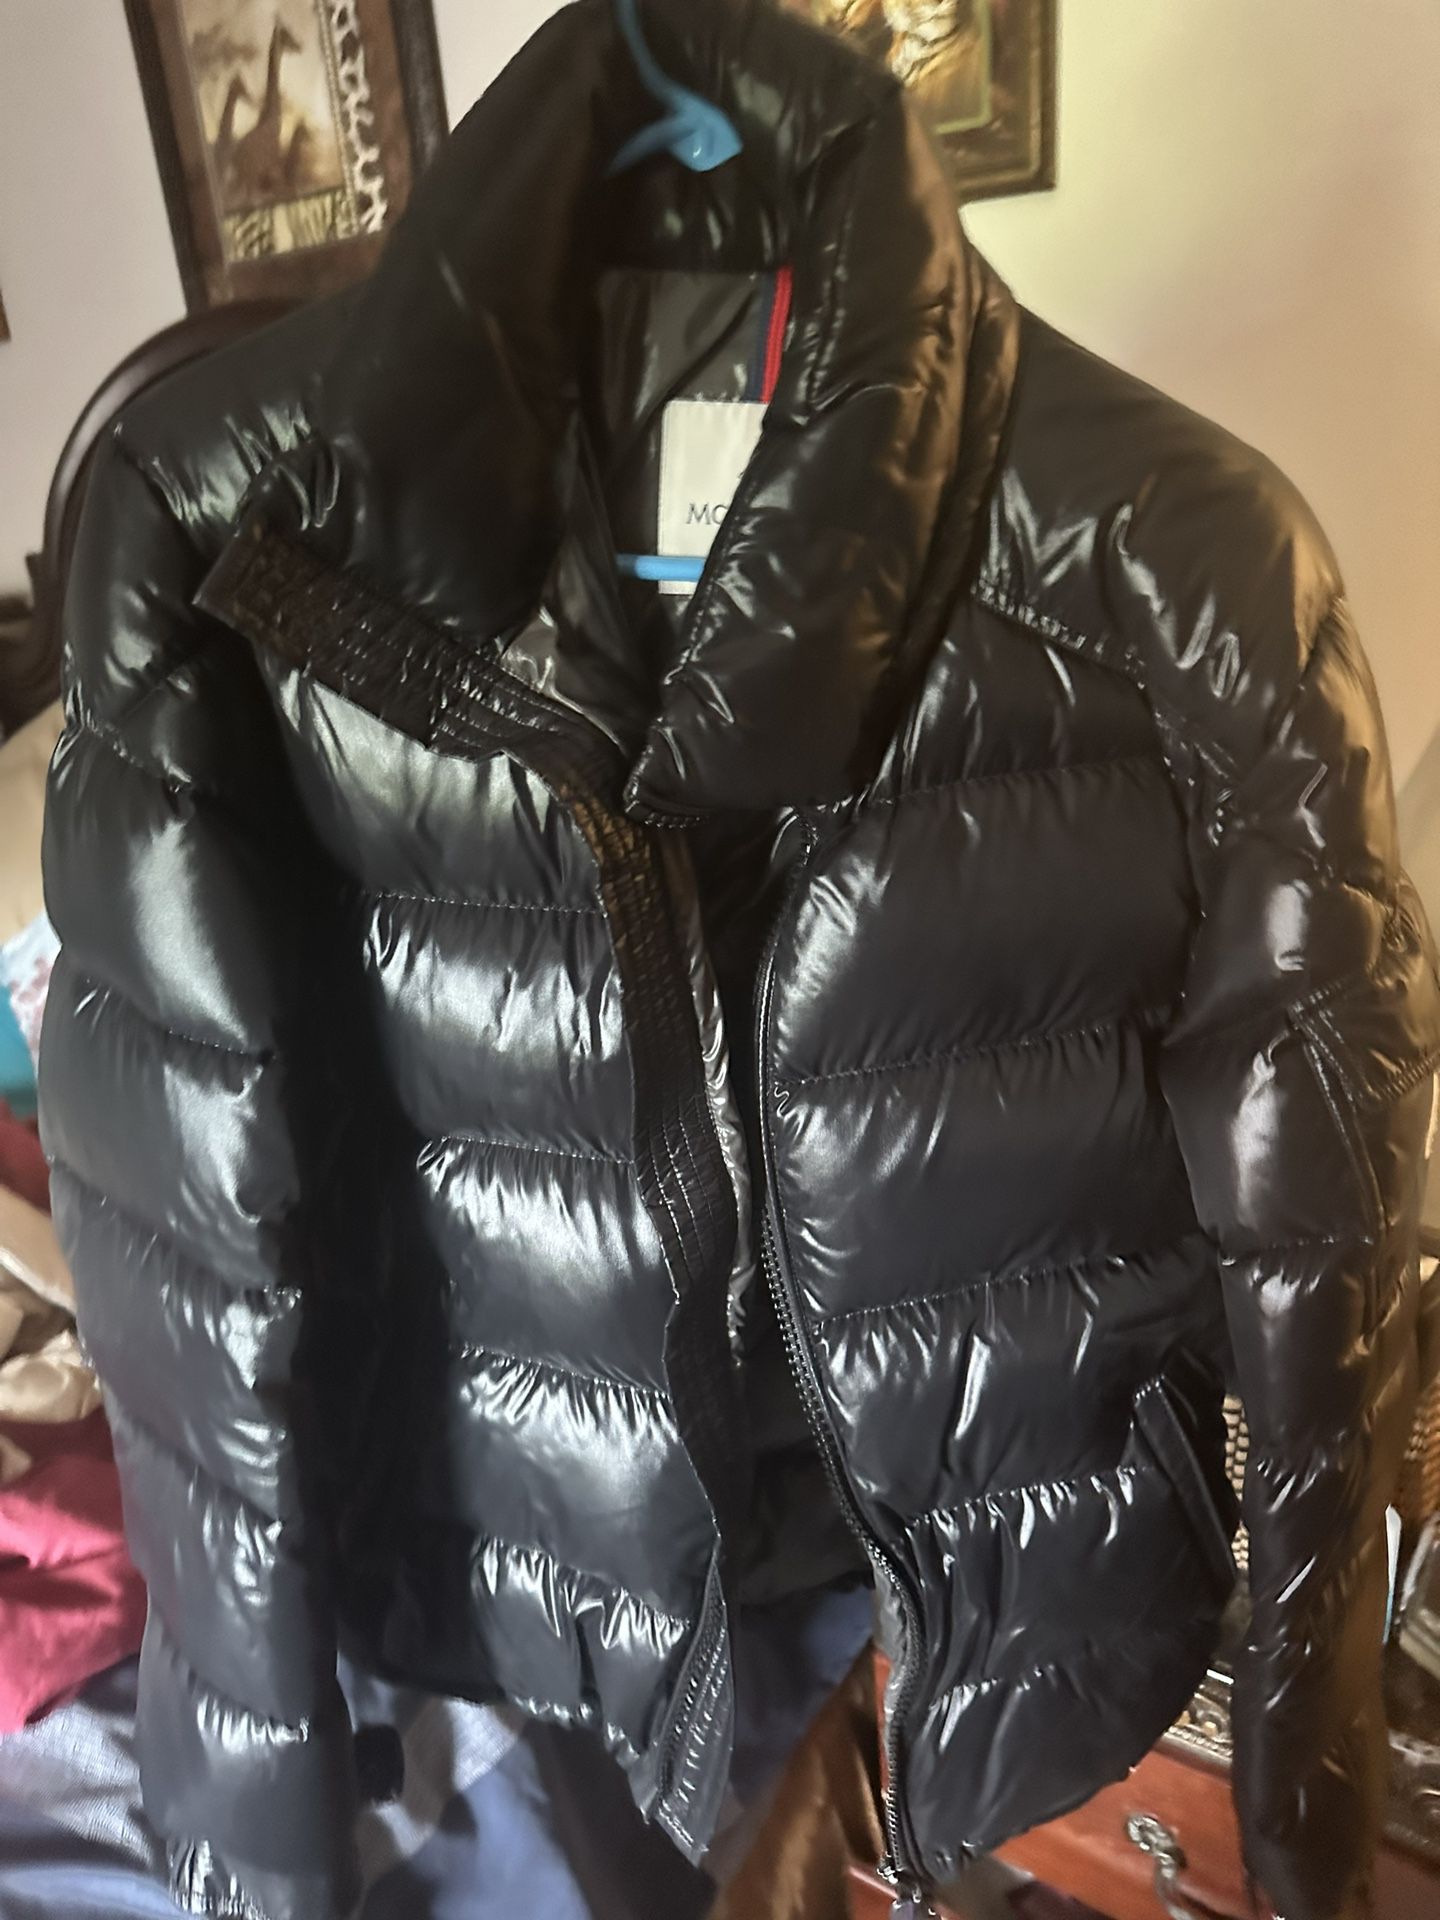 Moncler Jacket Good Condition